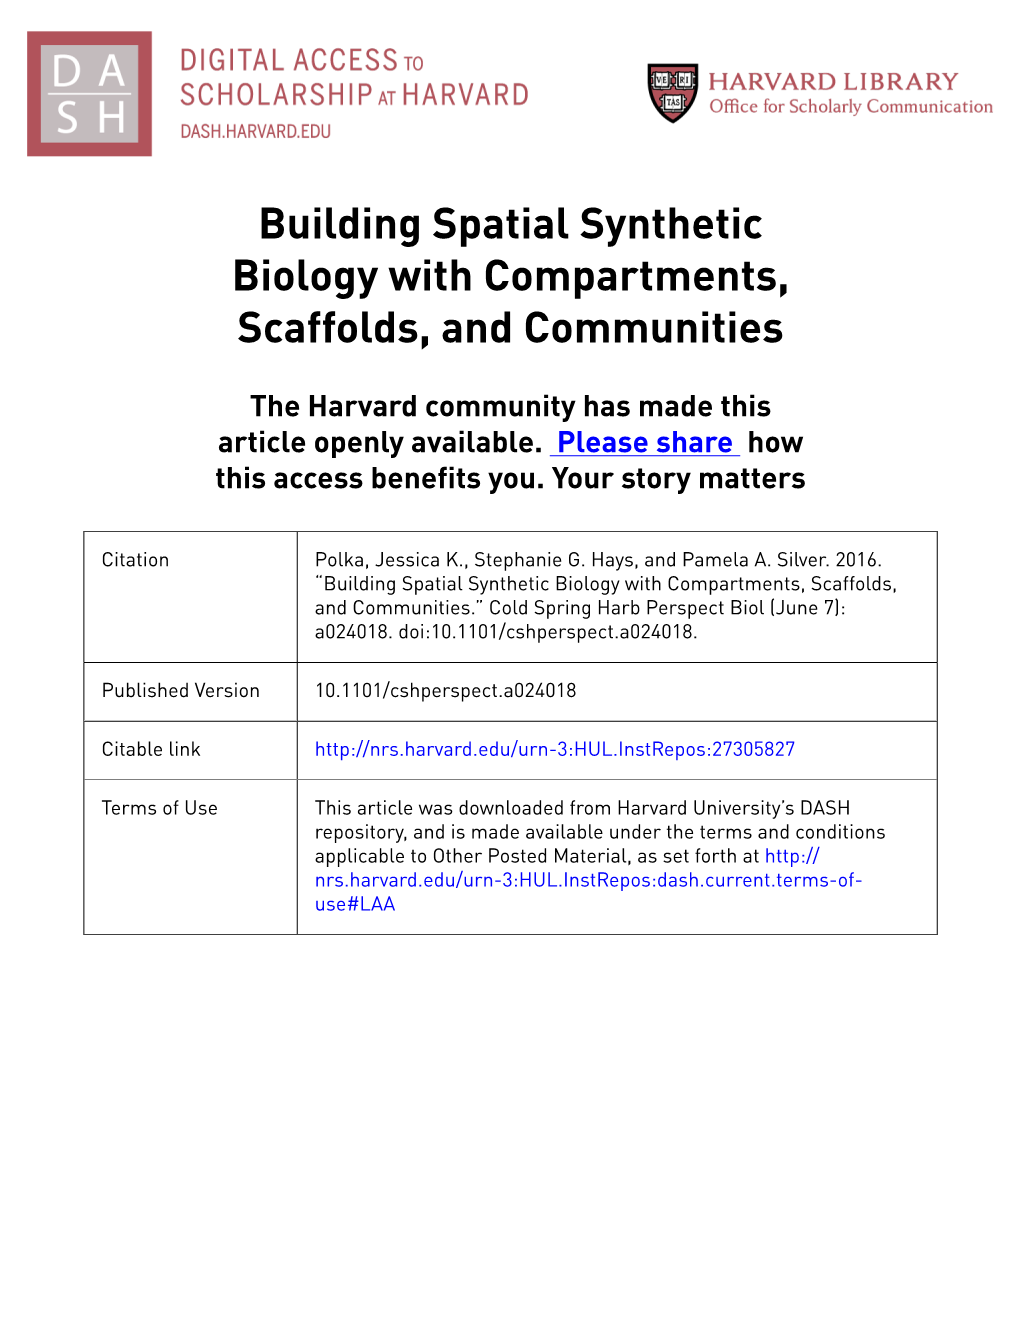 Building Spatial Synthetic Biology with Compartments, Scaffolds, and Communities